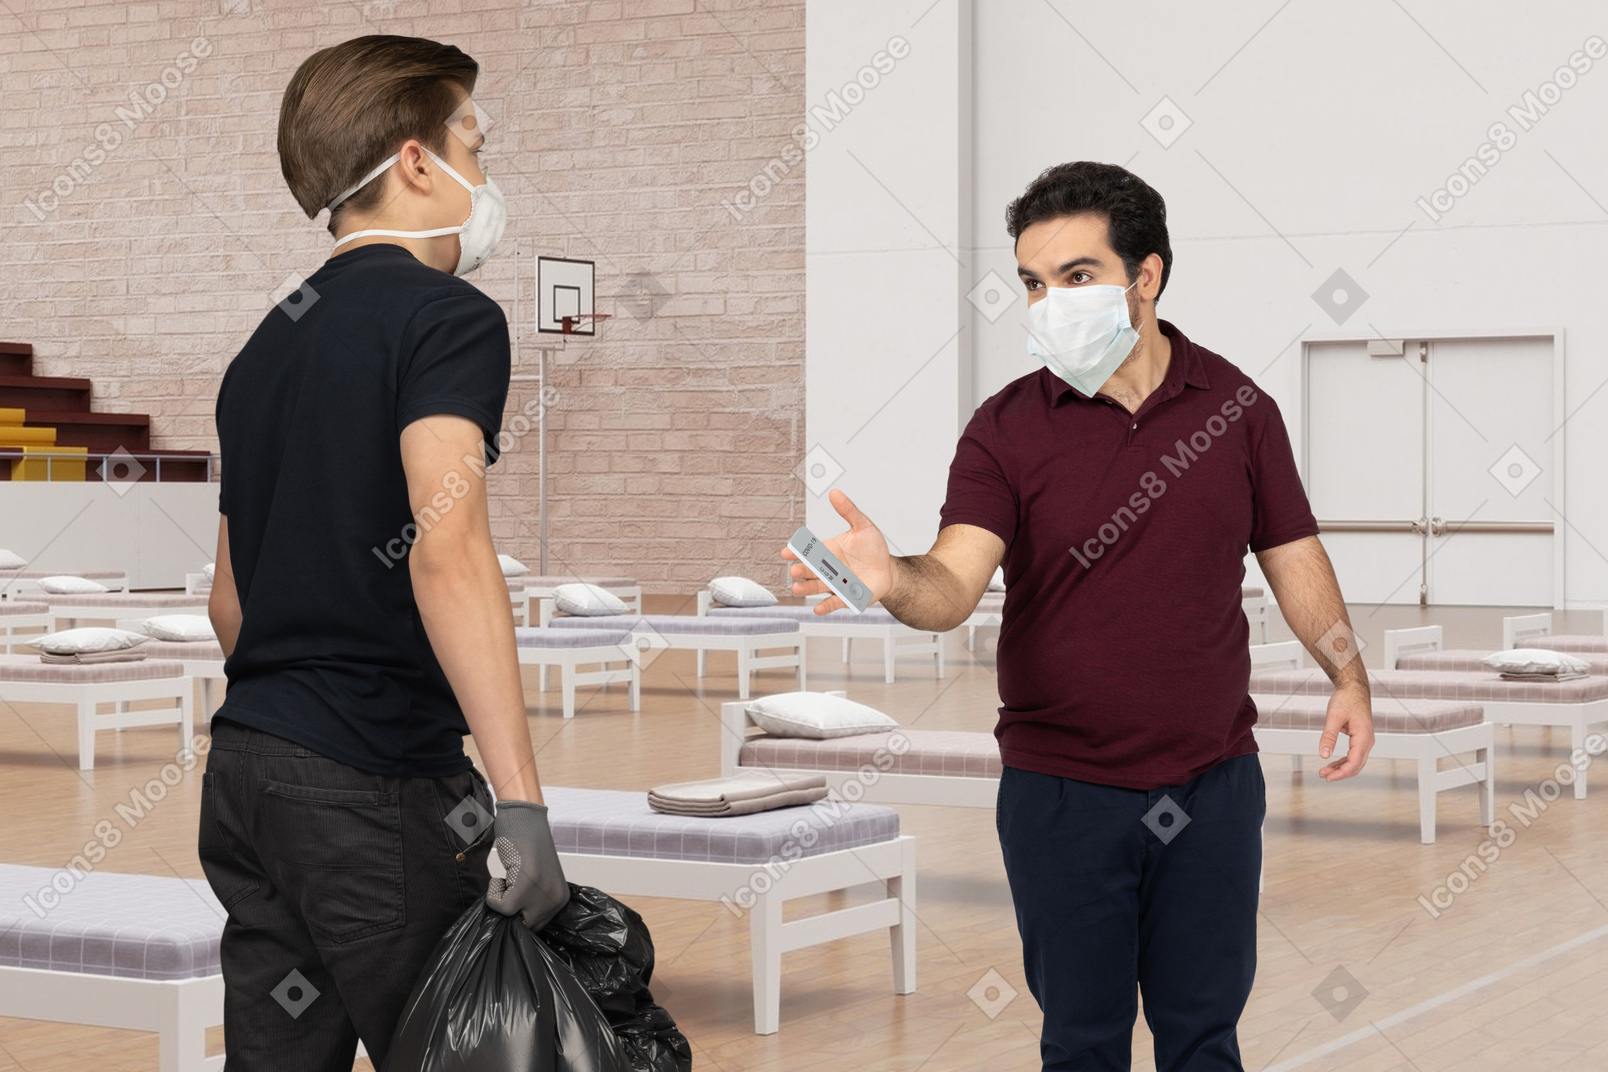 Man in face mask holding a trash bag standing next to a man in face mask with measuring device at the hospital